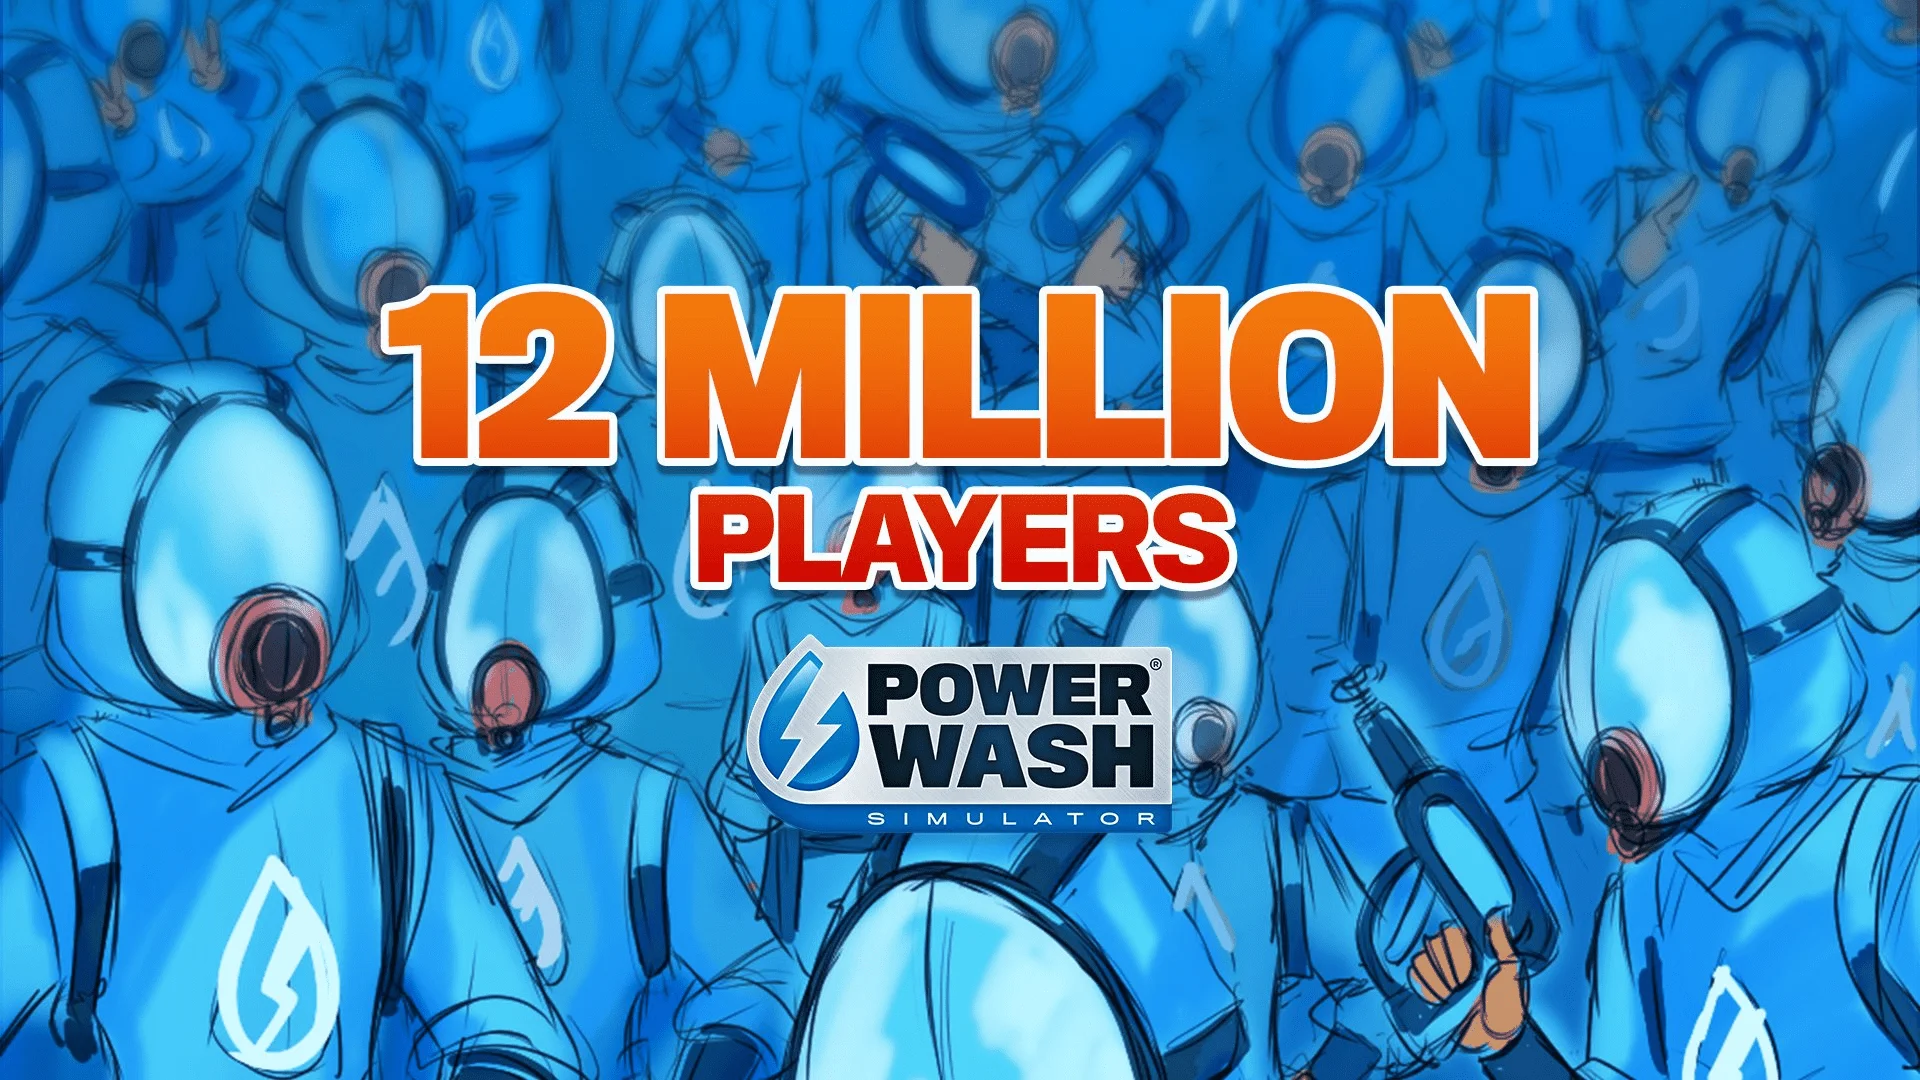 Washing simulator PowerWash Simulator gained 12 million unique players after release